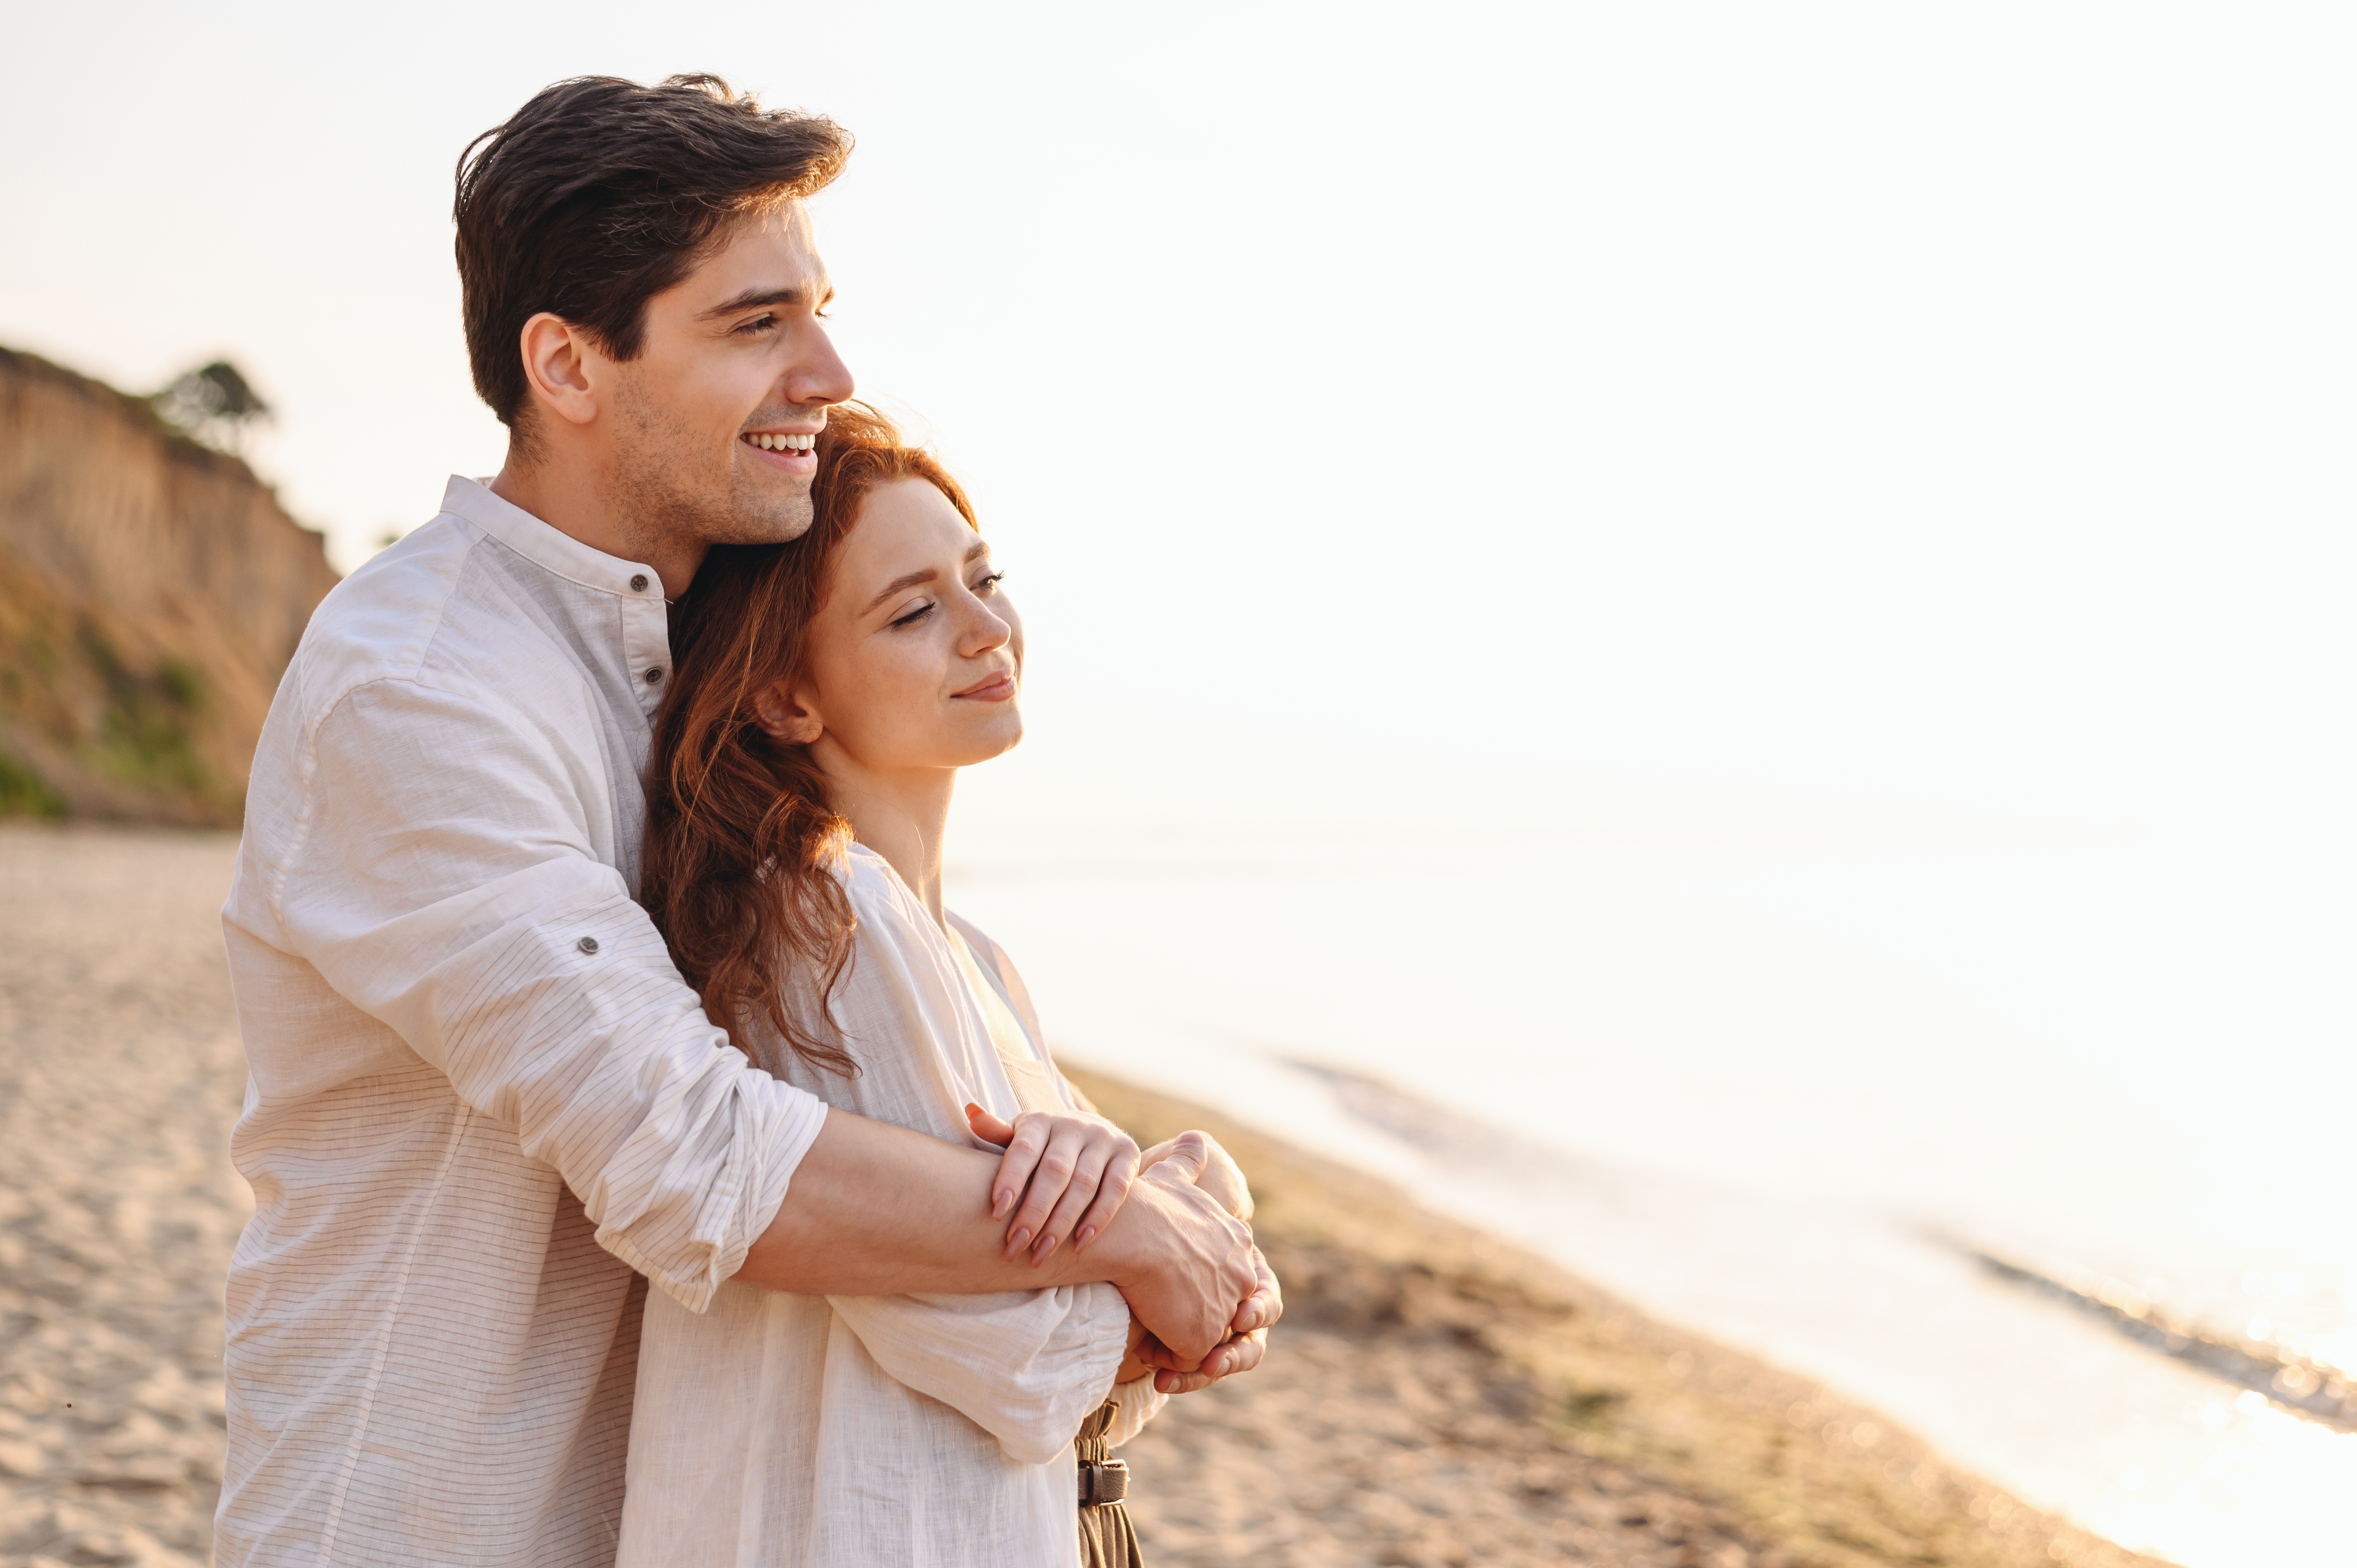 A happy couple standing on a beach | Source: Shutterstock